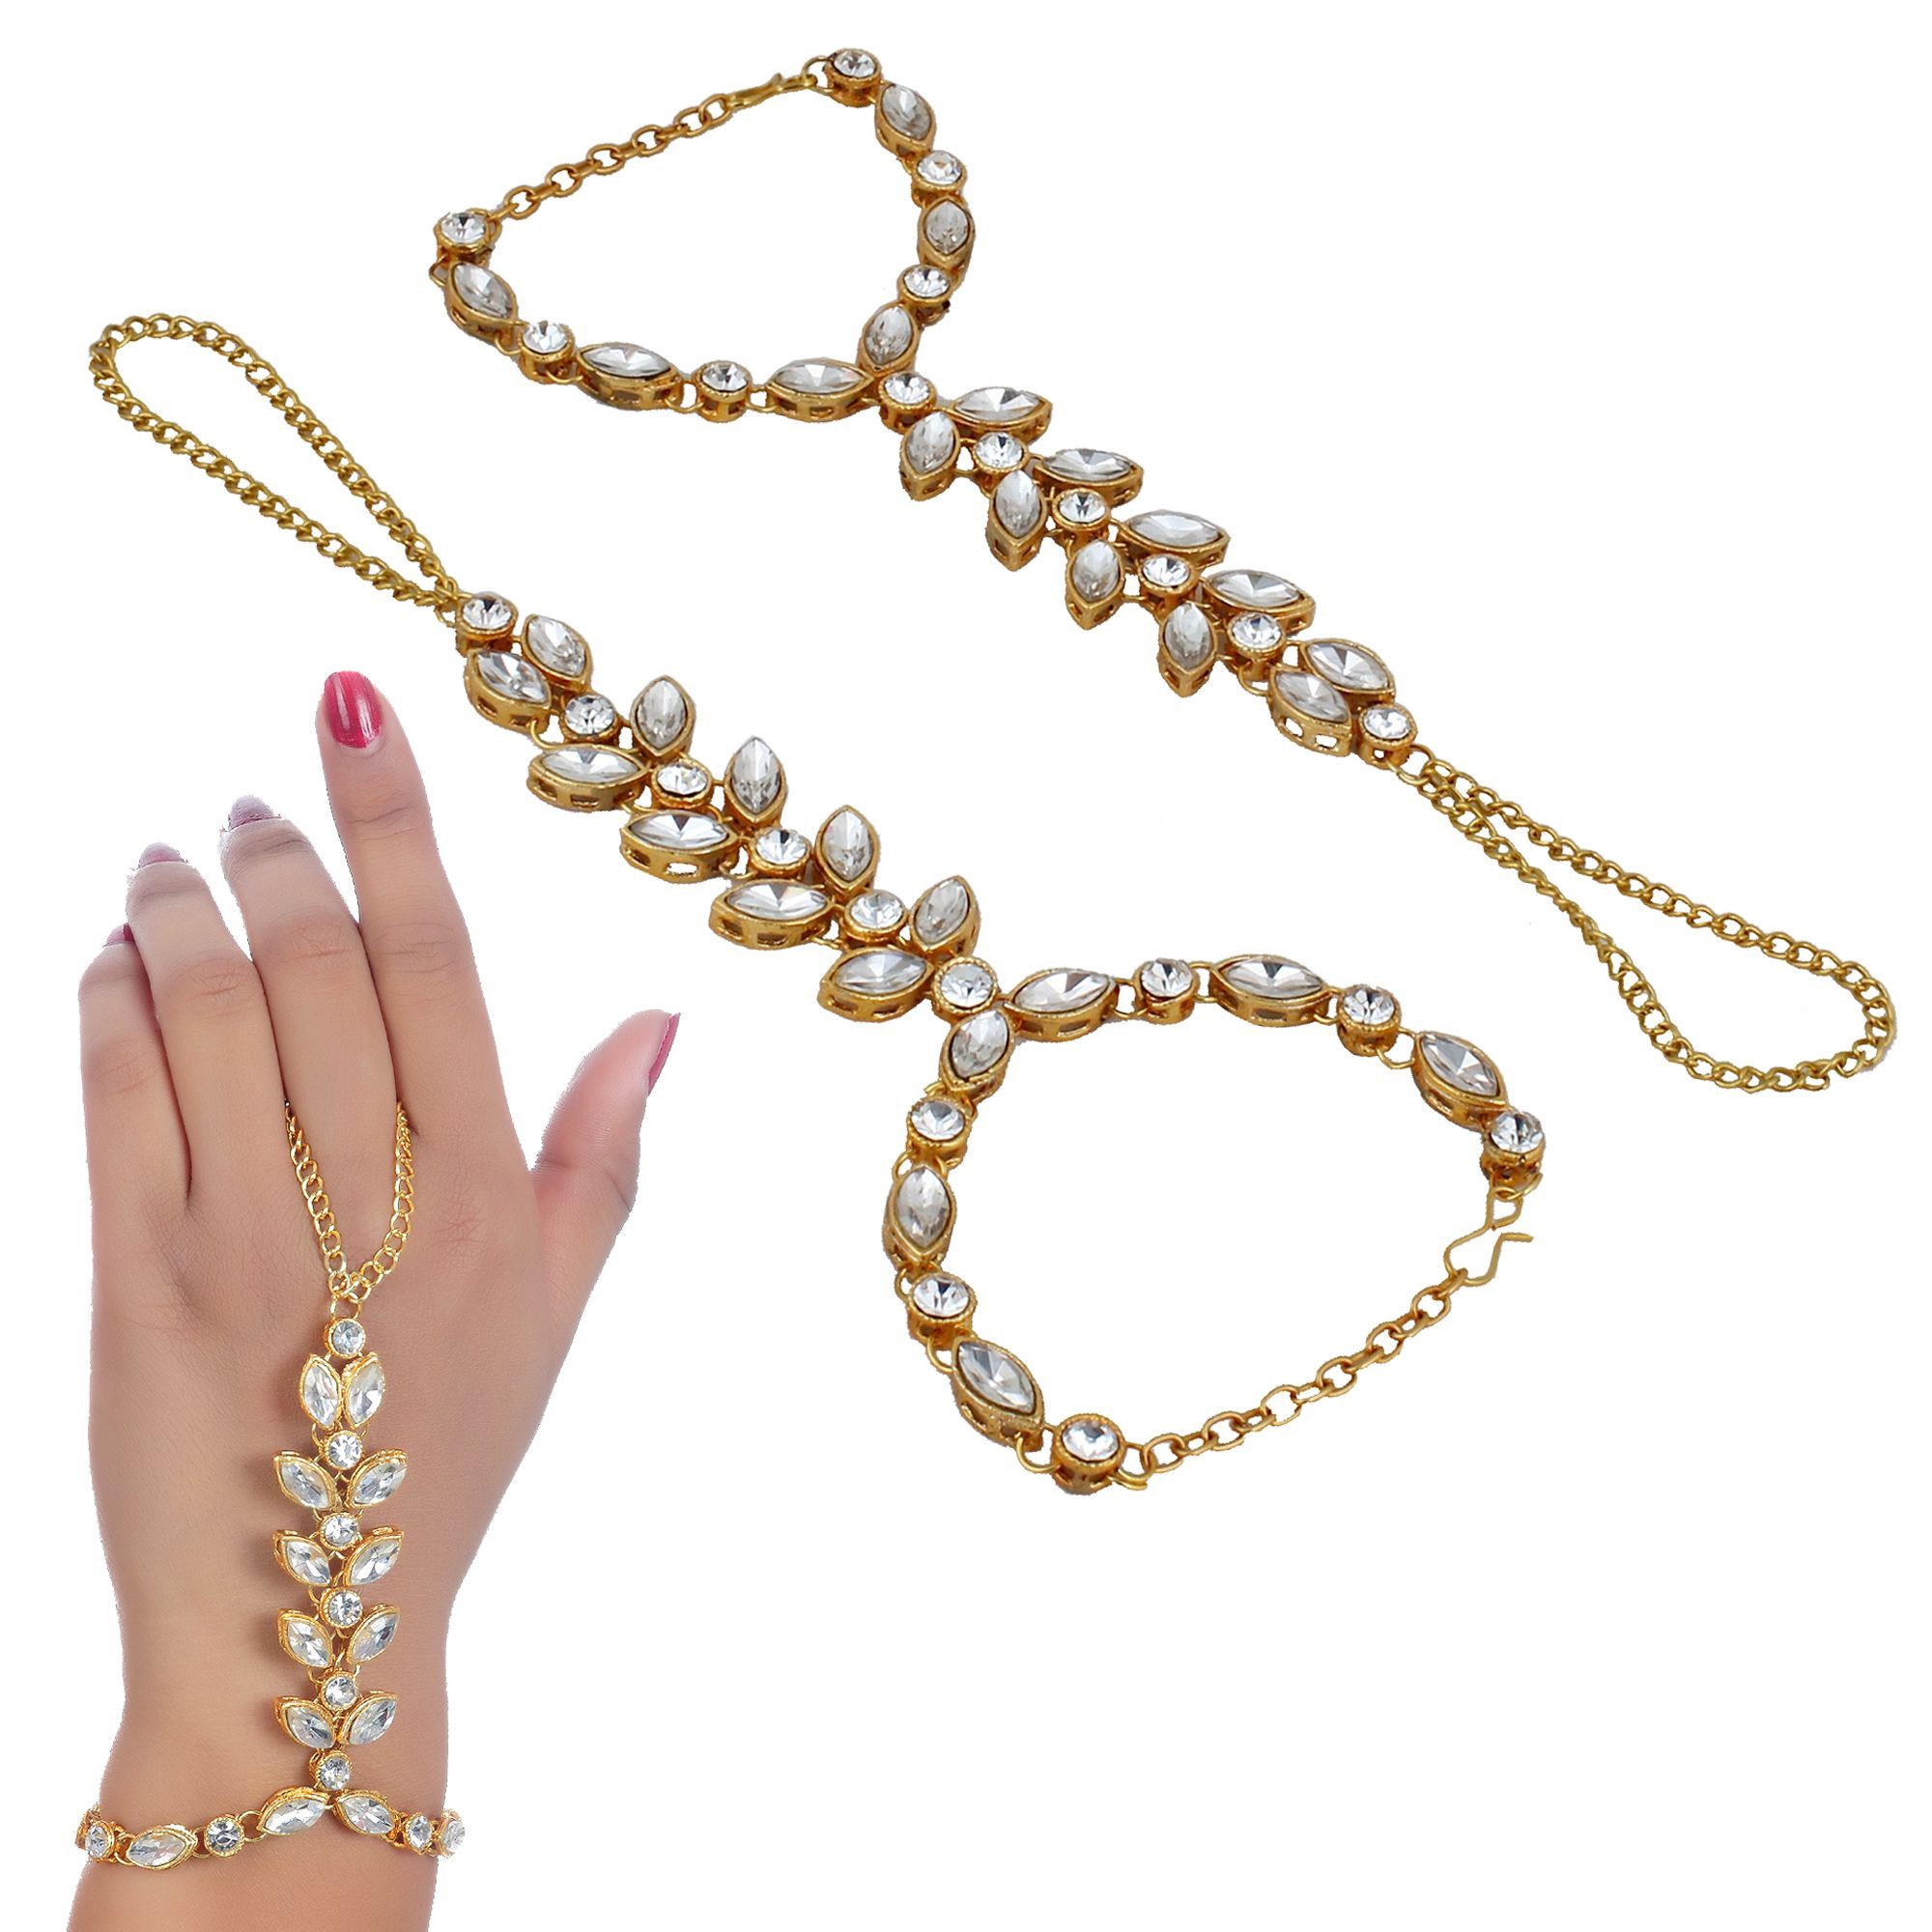 Creative Copper Gold plated Bead Chain Connected Finger Ring Bangle  Bracelets for Women Linked Hand Harness Fashion Jewelry Gift - AliExpress